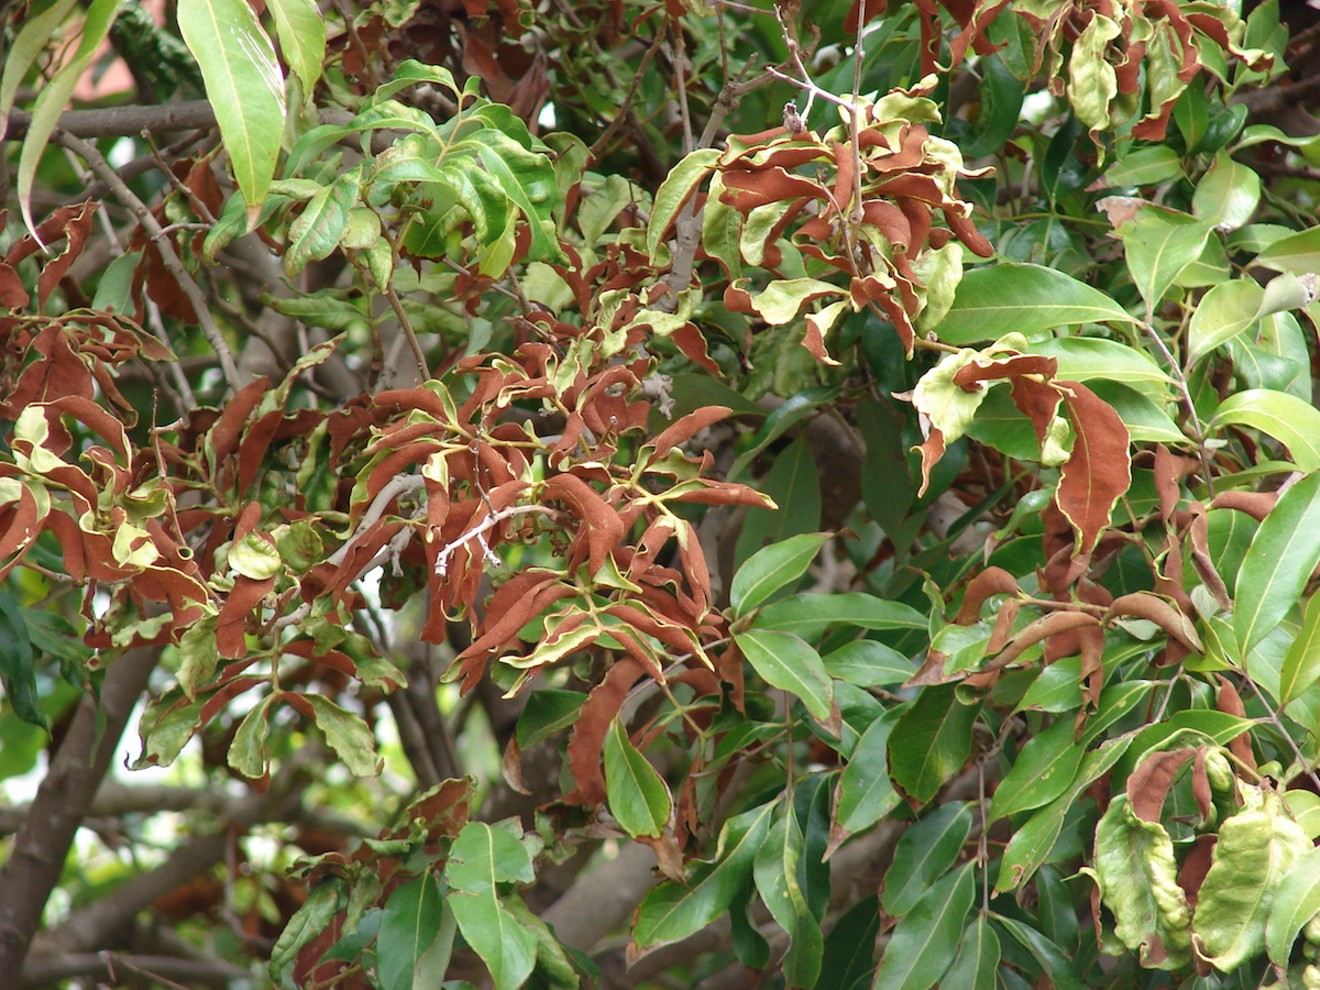 A Hawaiian lychee tree infested with Aceria litchii.